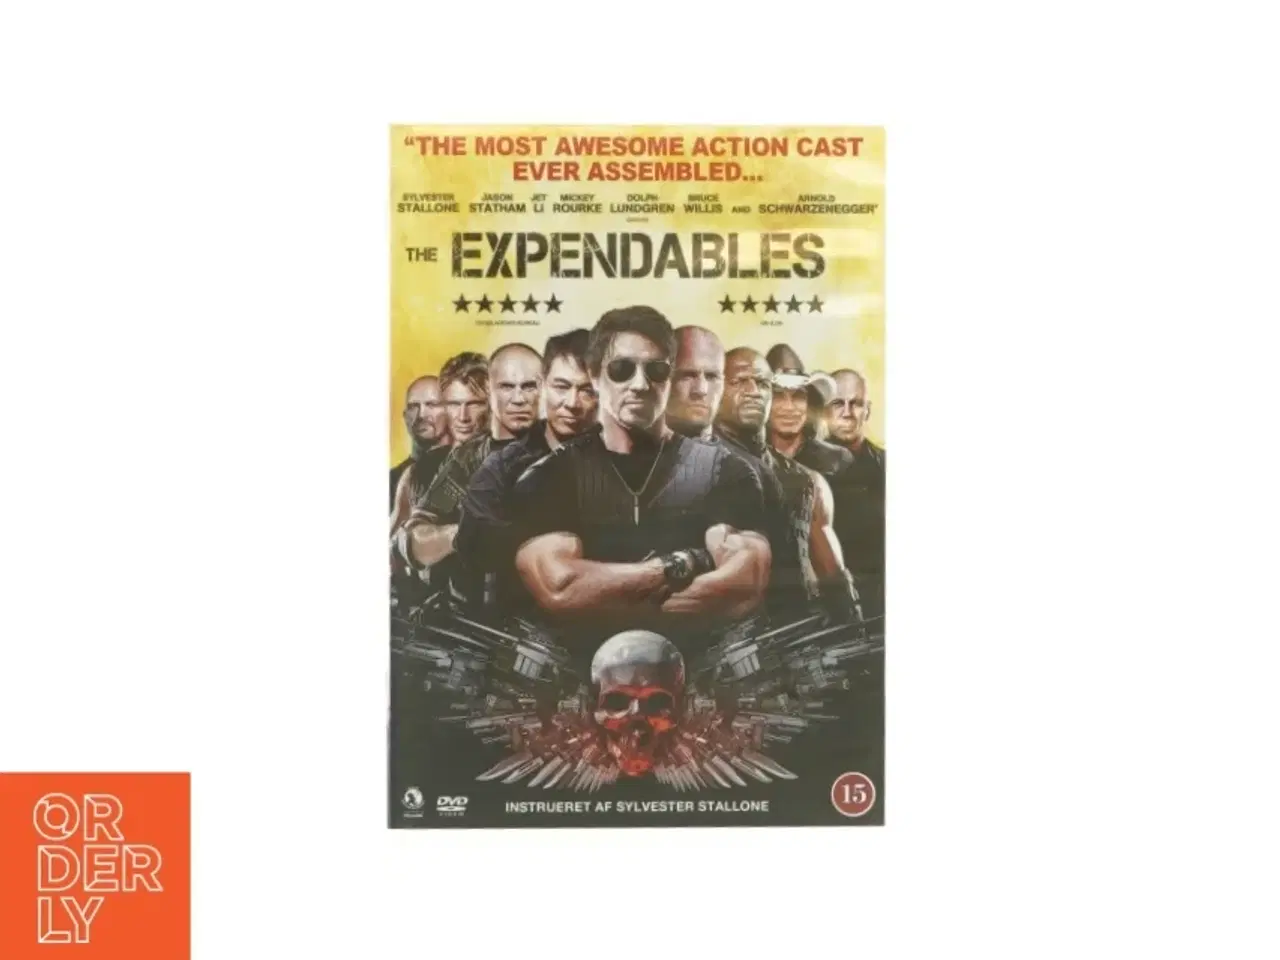 Billede 1 - The expendables (DVD)